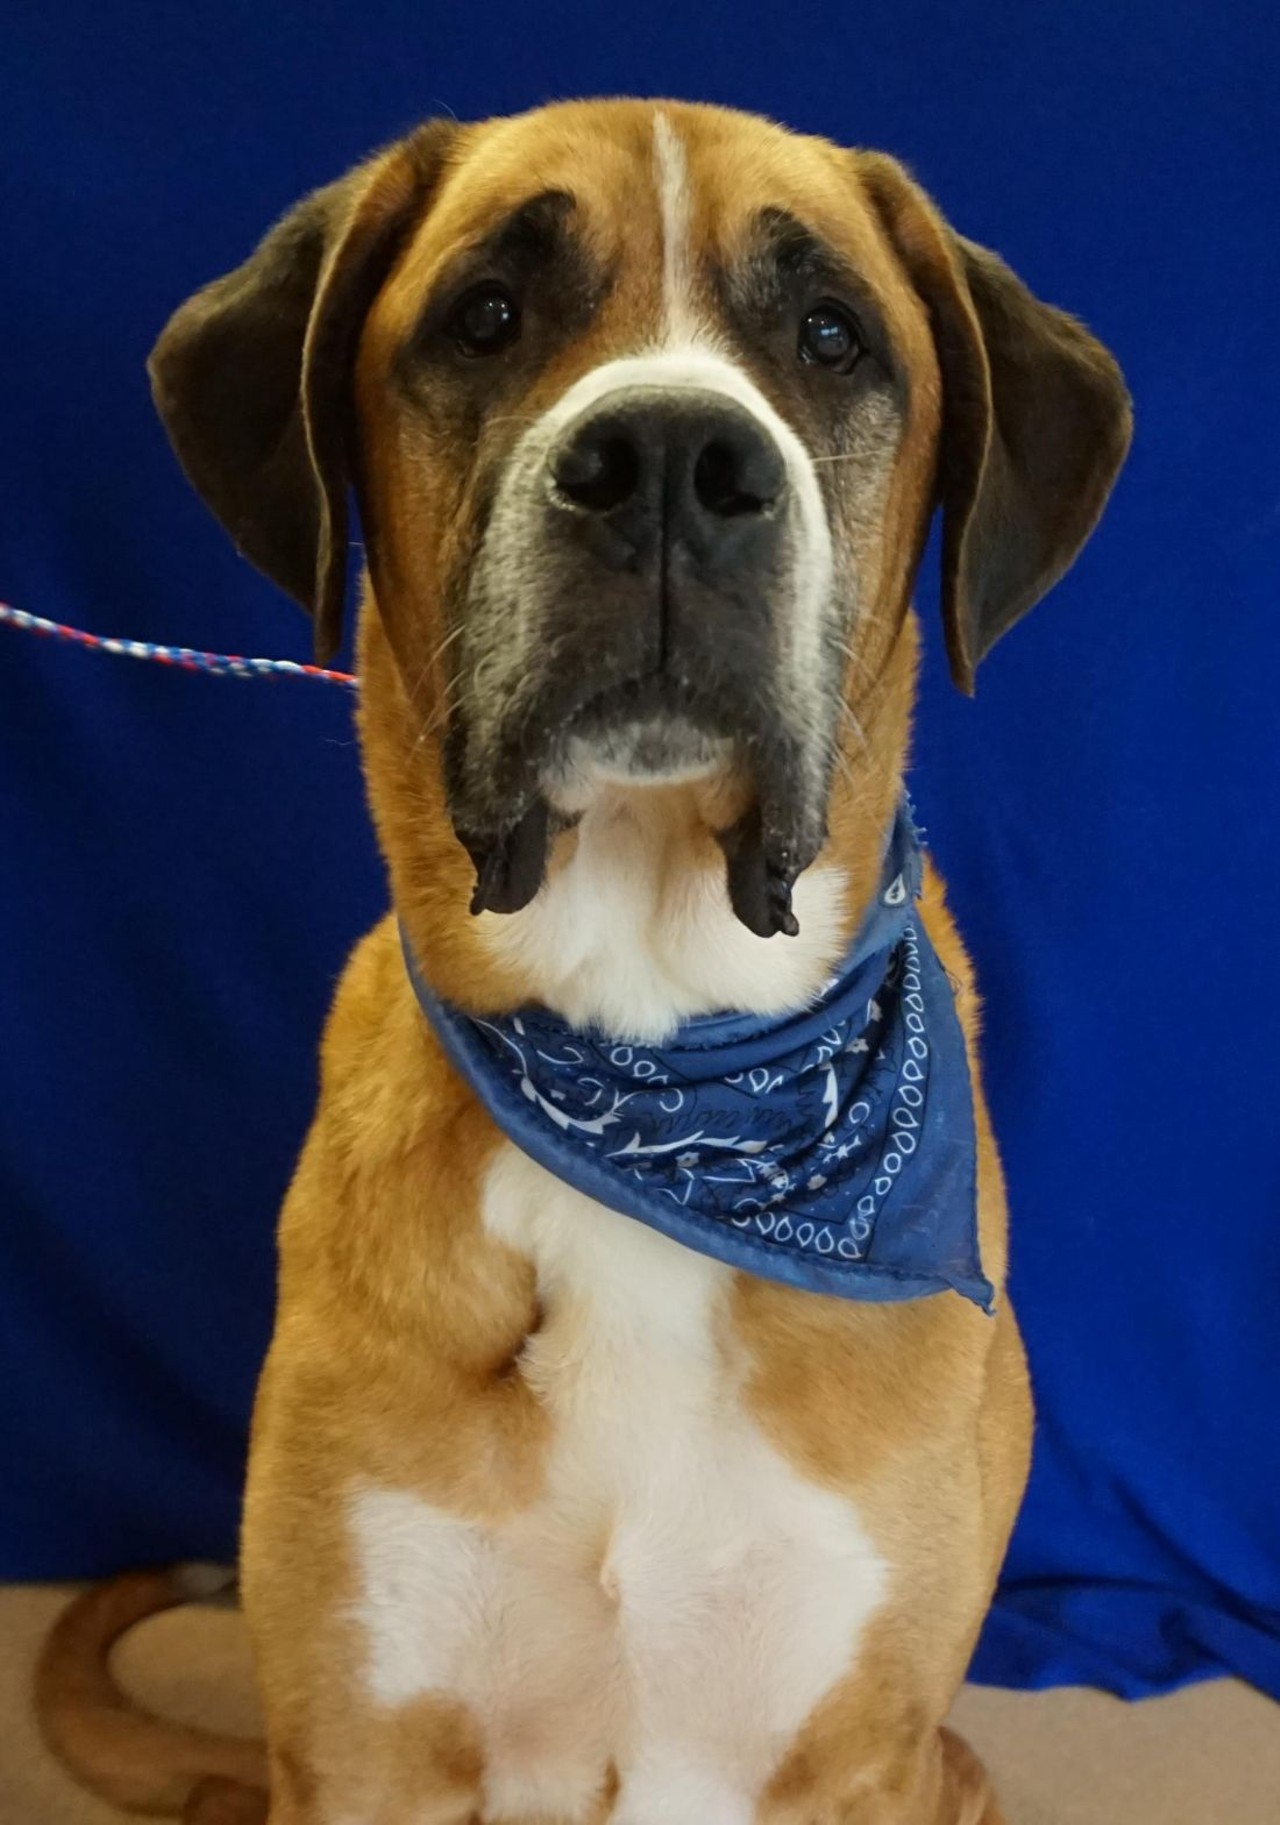 NAME: Taz
GENDER: Male
BREED: Saint Bernard-Great Dane mix
AGE: 6 years
WEIGHT: 108 pounds
SPECIAL CONSIDERATIONS: Very active and energetic
REASON I CAME TO MHS: Agency transfer
LOCATION: Petco of Sterling Heights
ID NUMBER: 862075